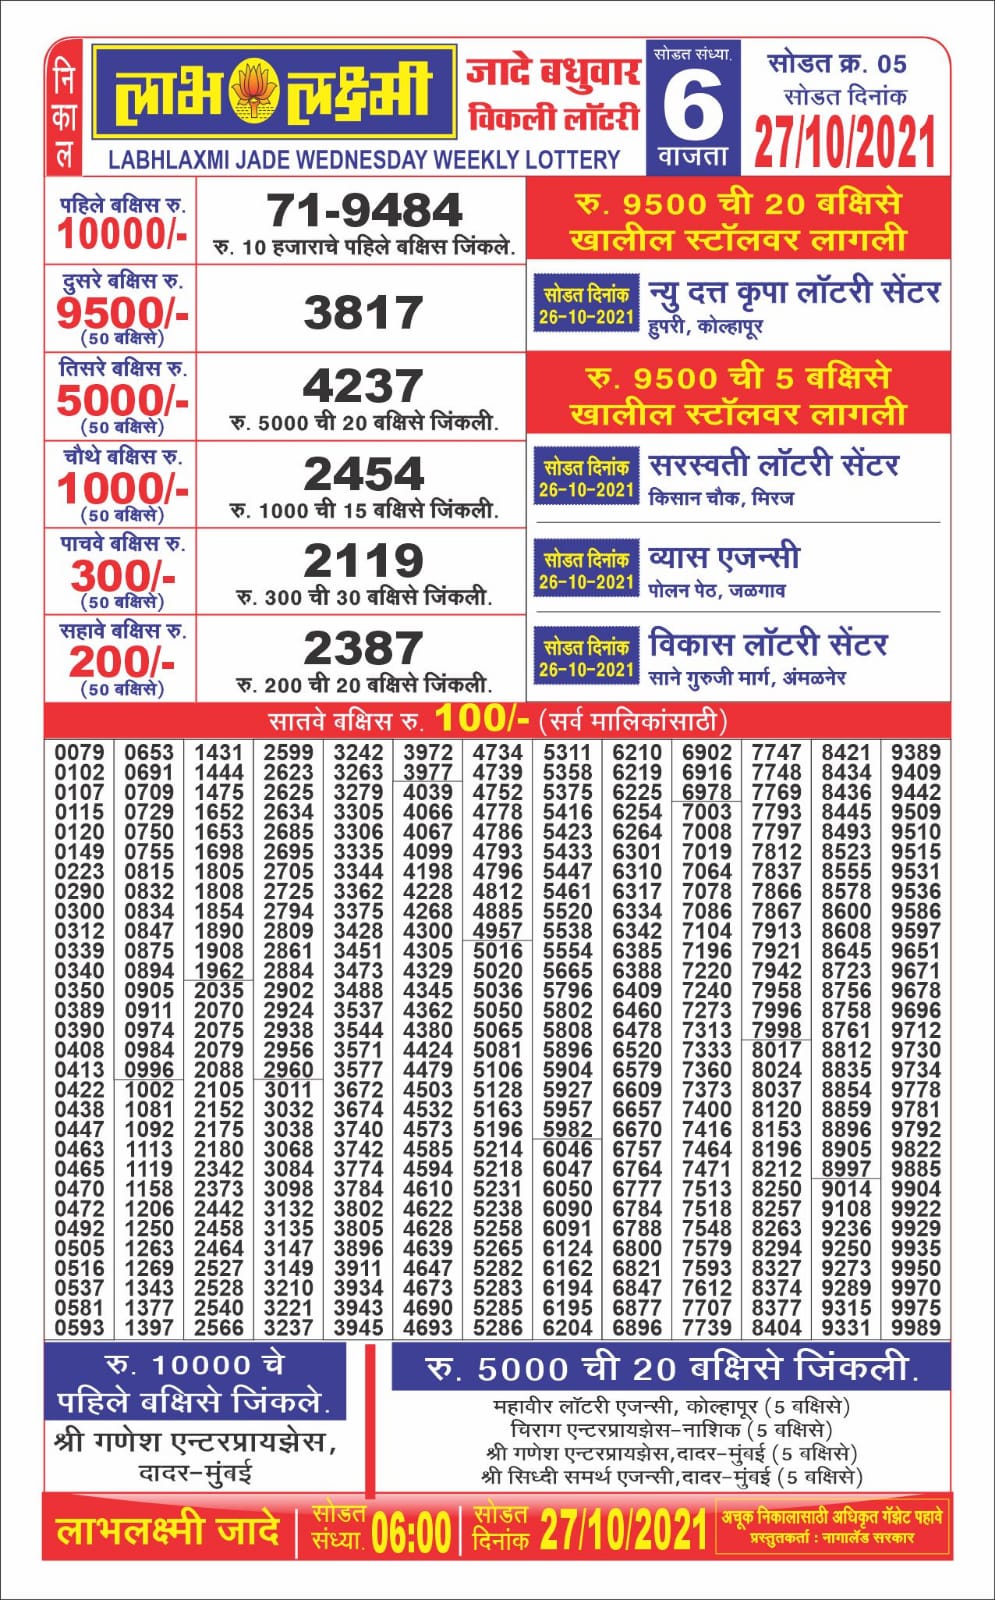 Labhlaxmi 6pm Lottery Result 27.10.2021